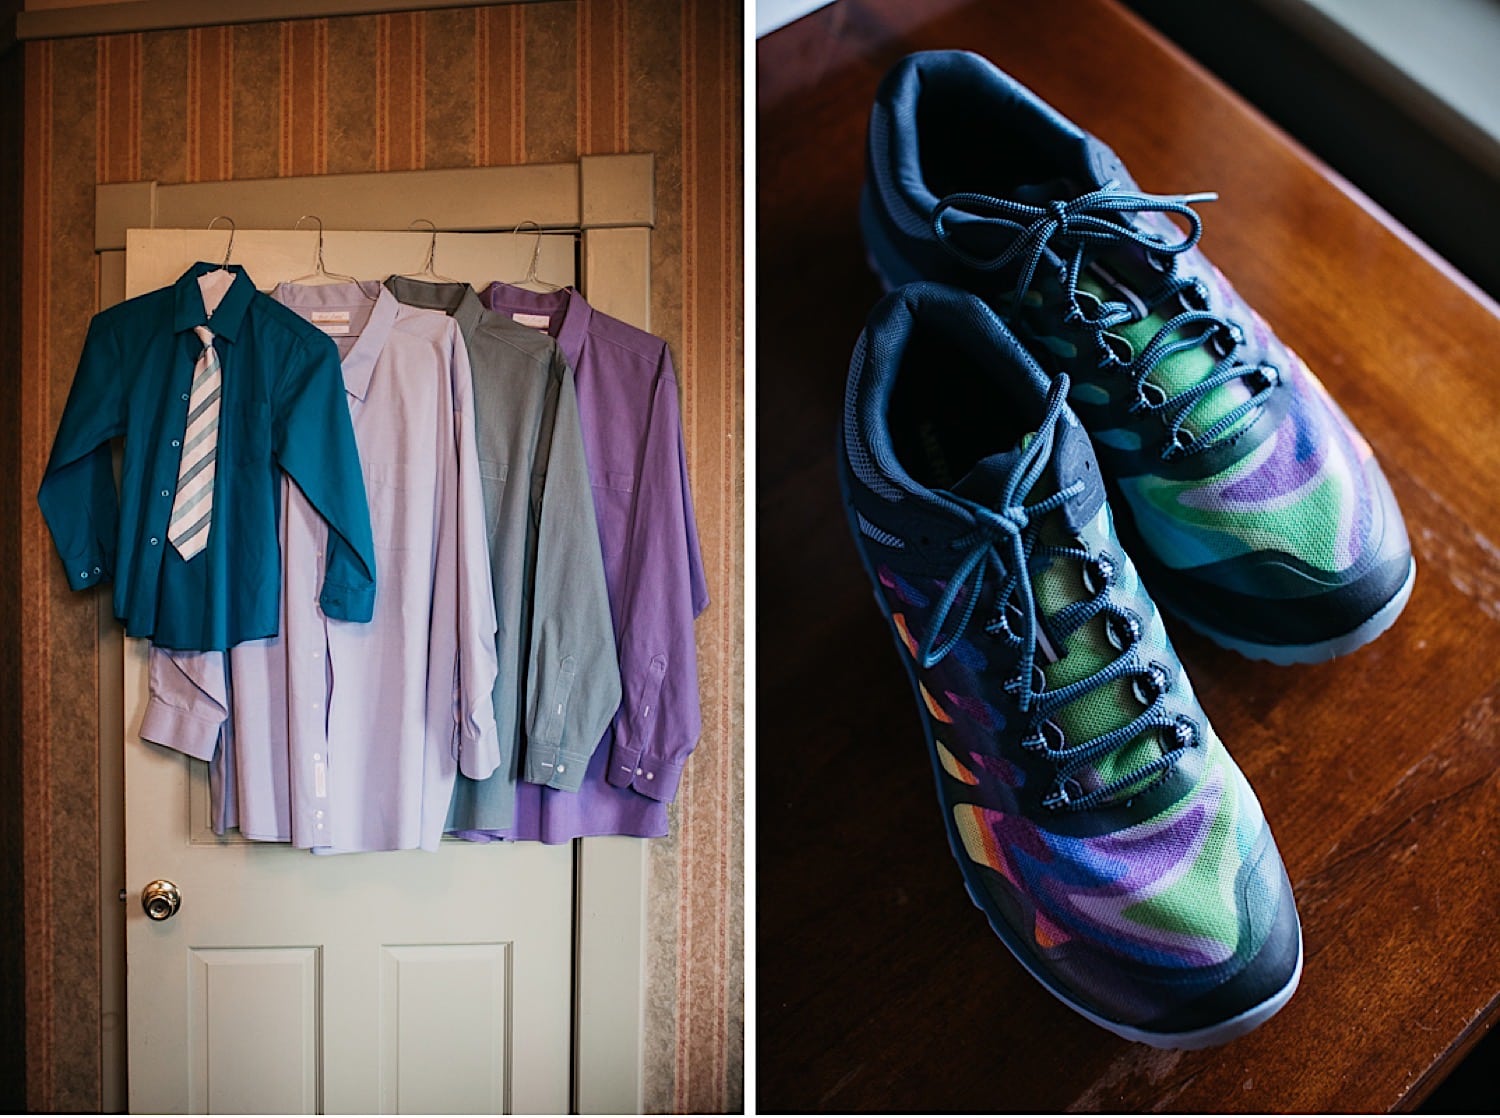 Groom and groomsmen dress shirts with Colorful tennis shoes for wedding